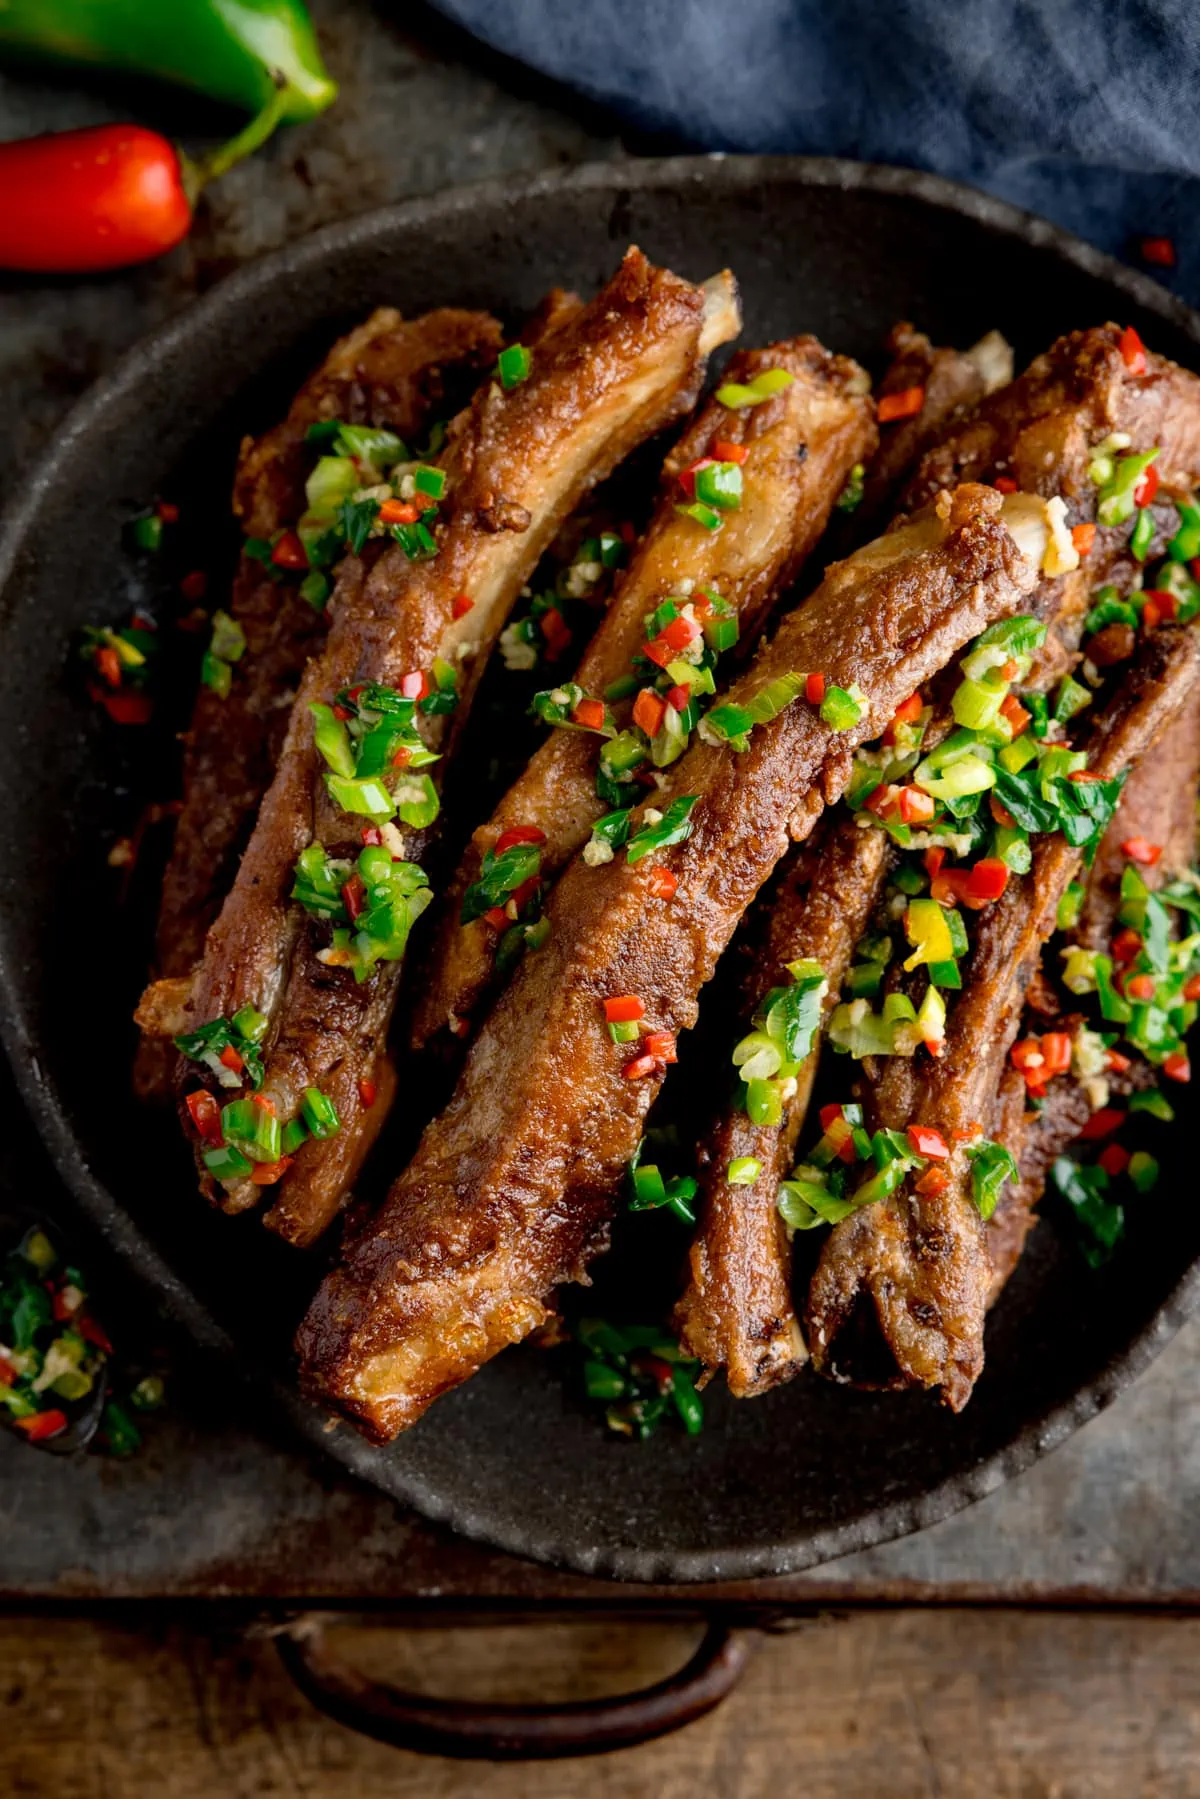 Overhead image of salt and pepper pork ribs on a black plate. The ribs are topped with chopped chillies and spring onions. The plate is on a dark background. There is a blue napkin and a red and green chilli pepper in the top of the frame.